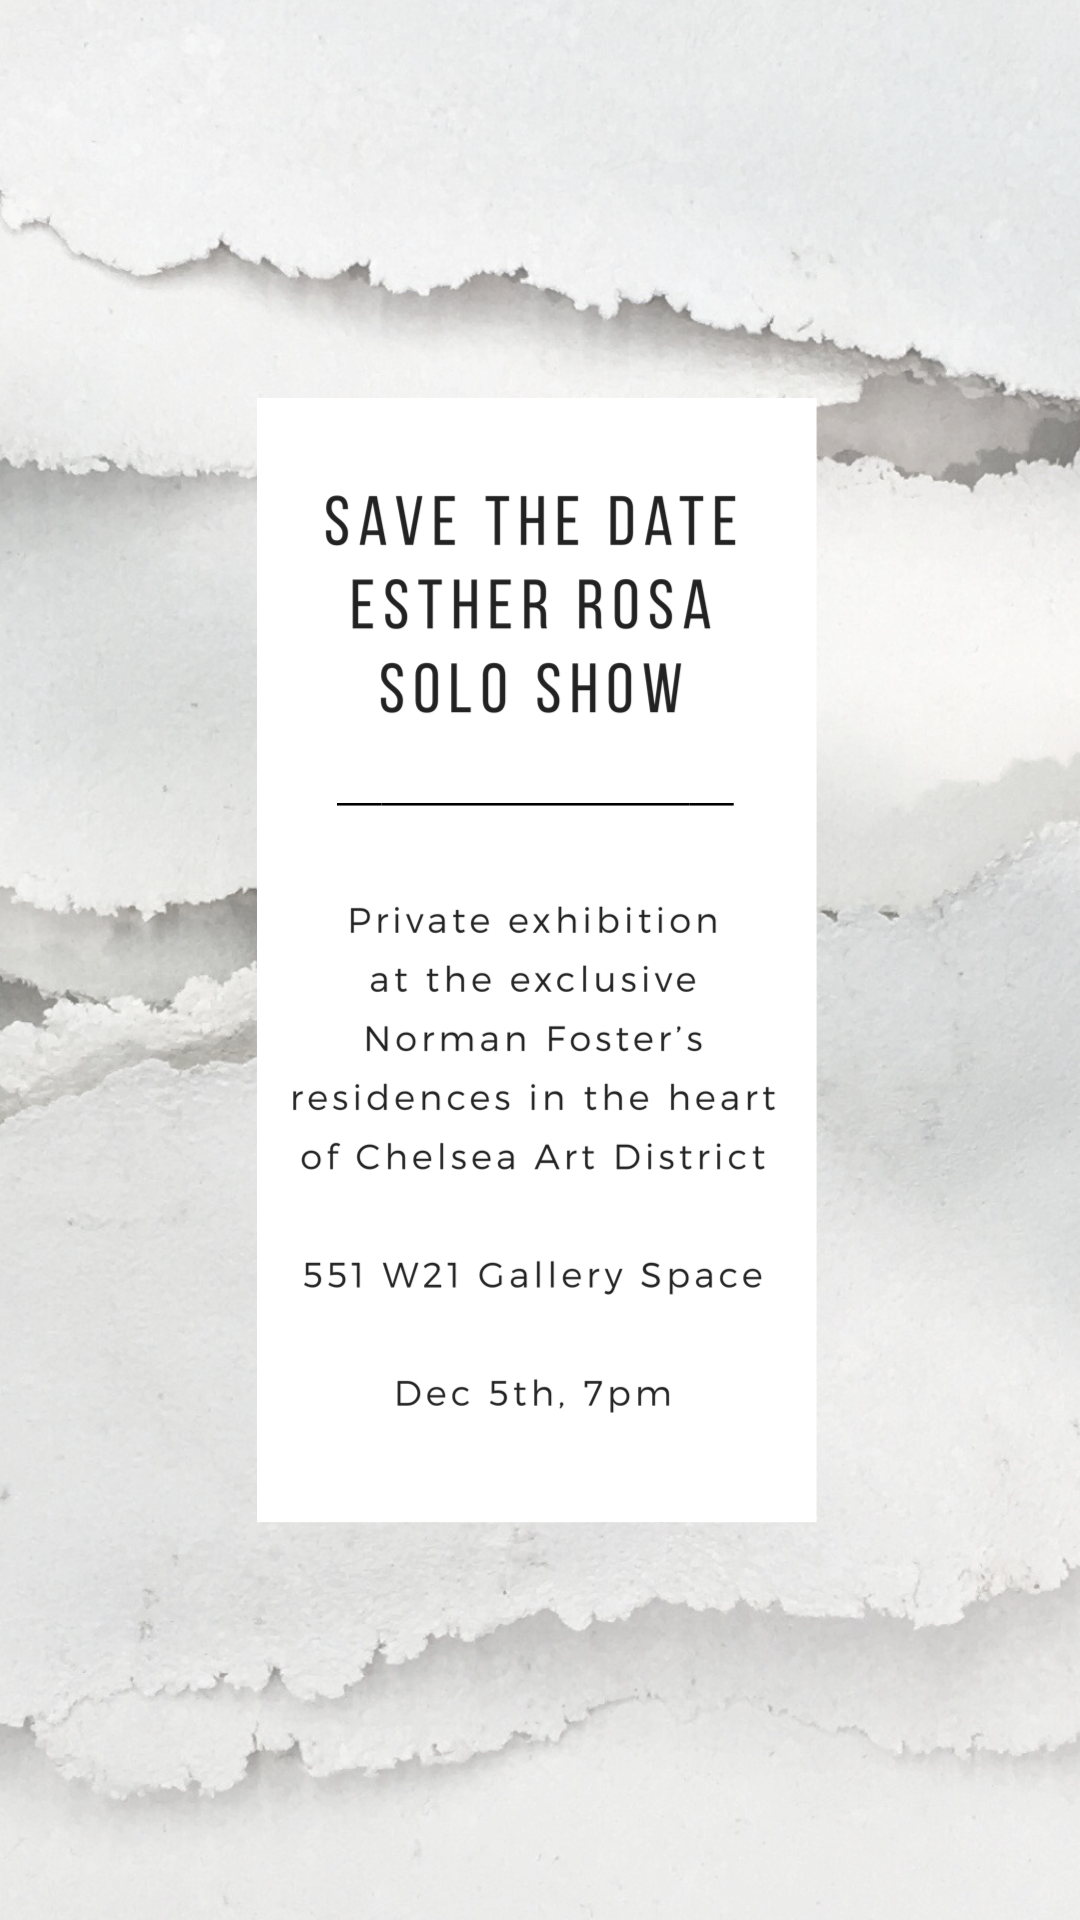 SAVE THE DATE, ESTHER ROSA SOLO SHOW, Dec 5th, 7pm